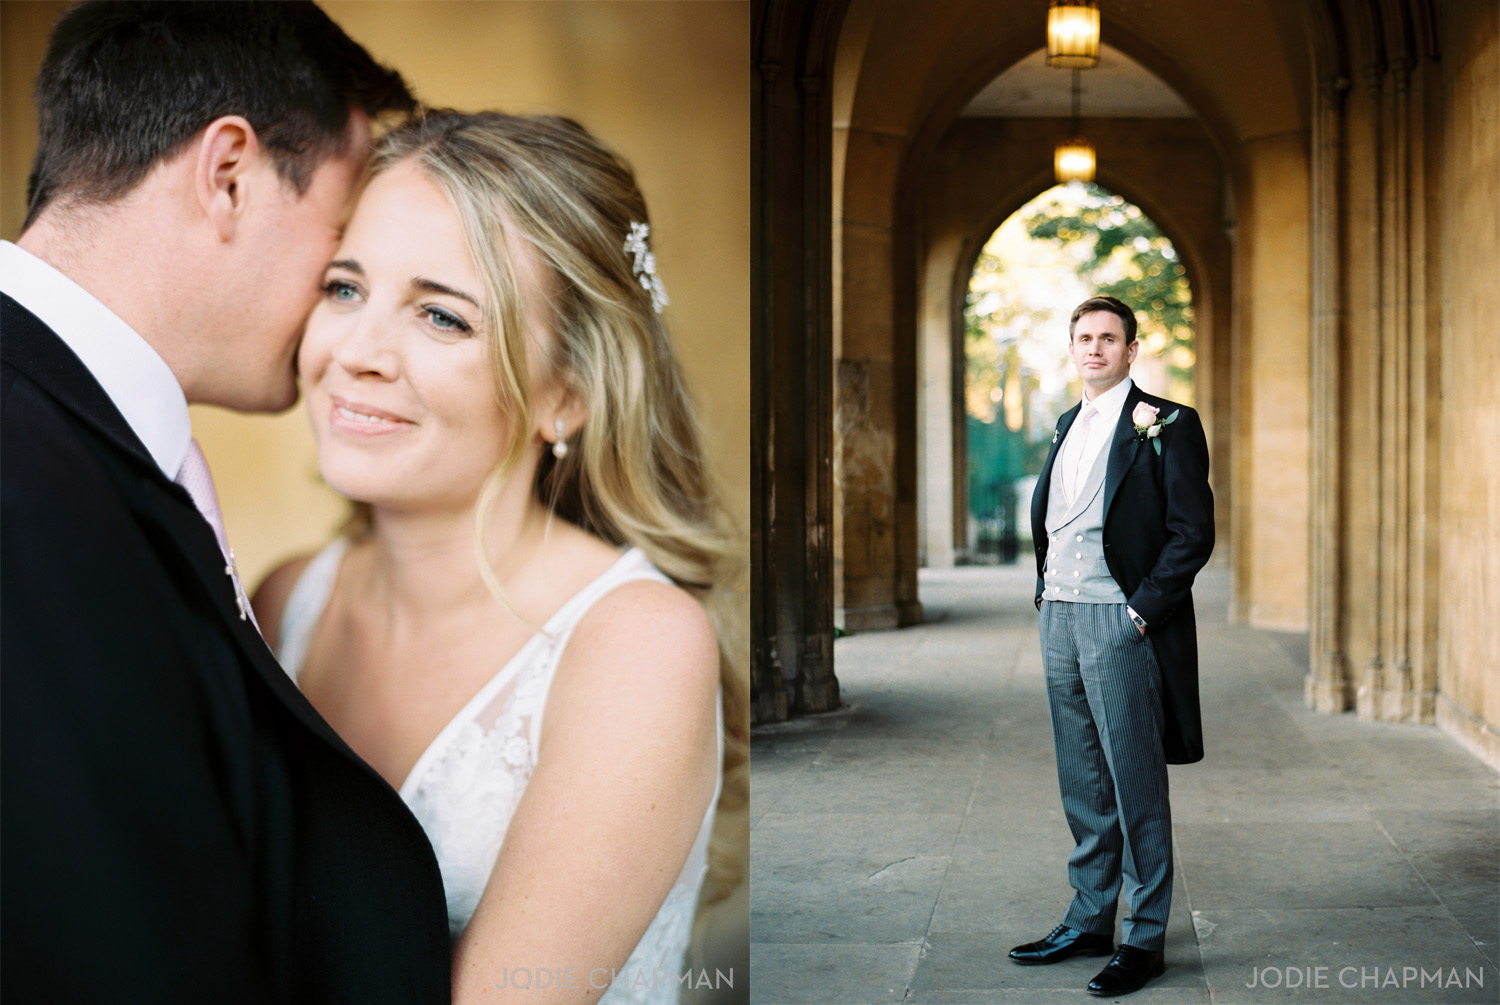 image of a bride and groom at a wedding at st lukes church chelsea